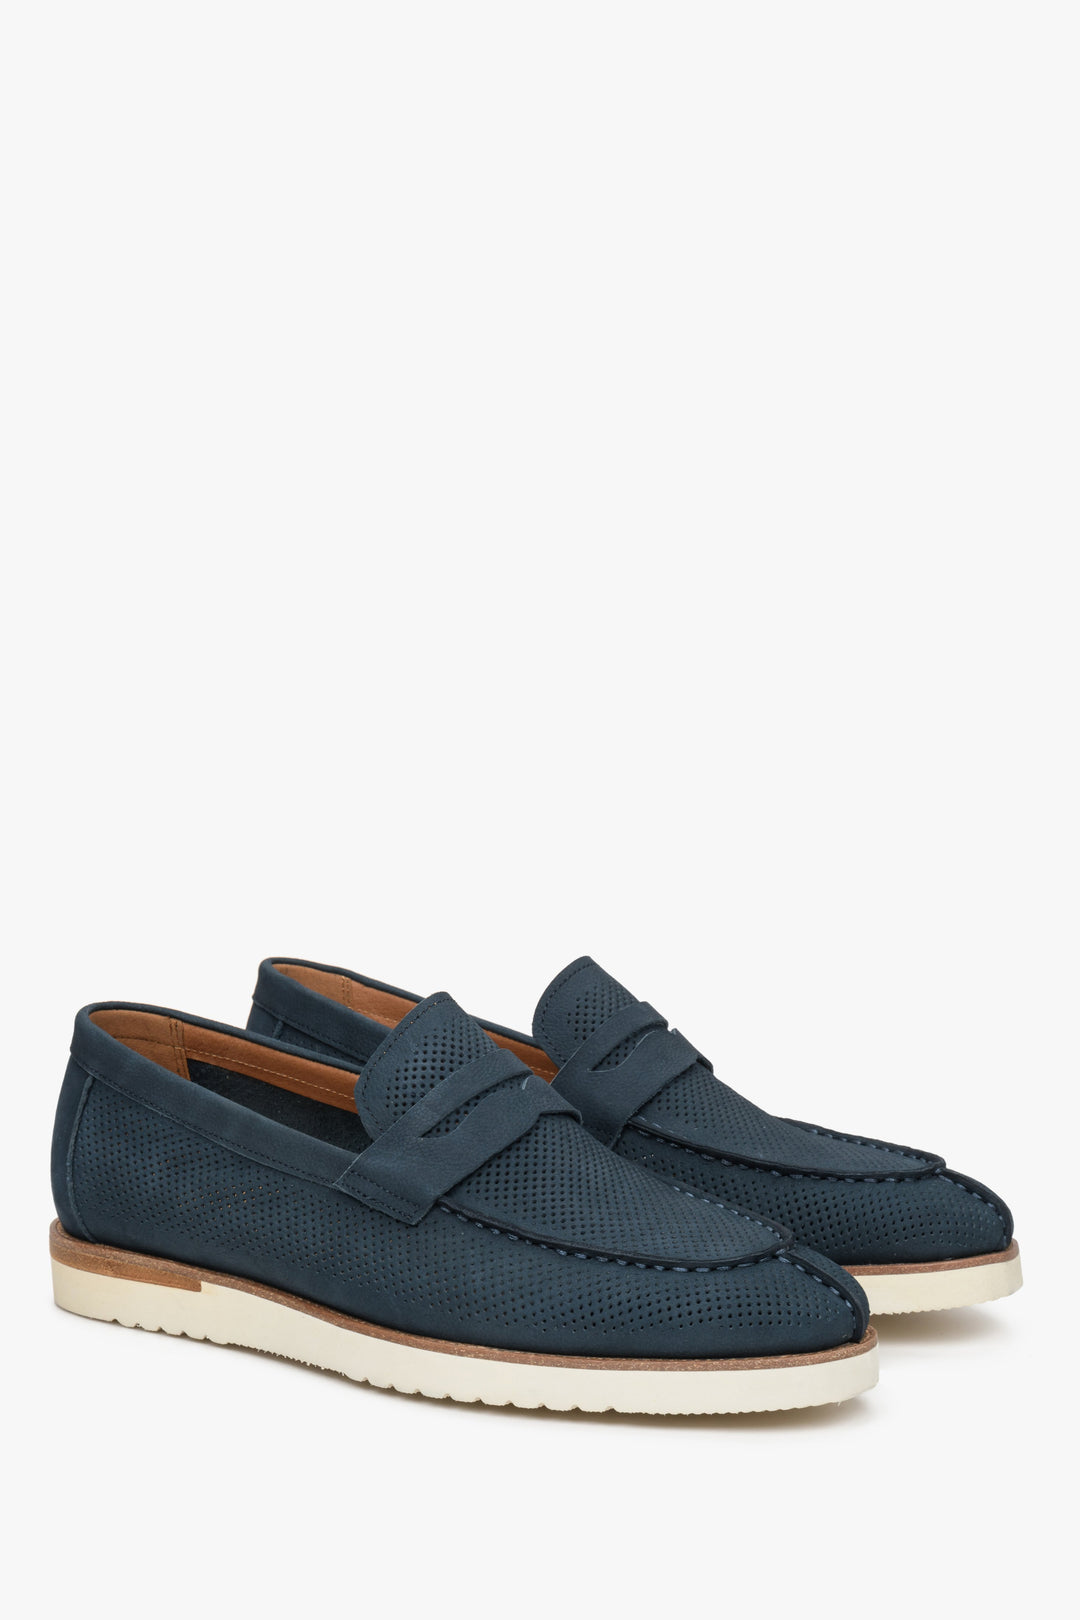 Estro navy blue nubuck men's loafers with perforation - presentation of the toe and side seam of the shoes.